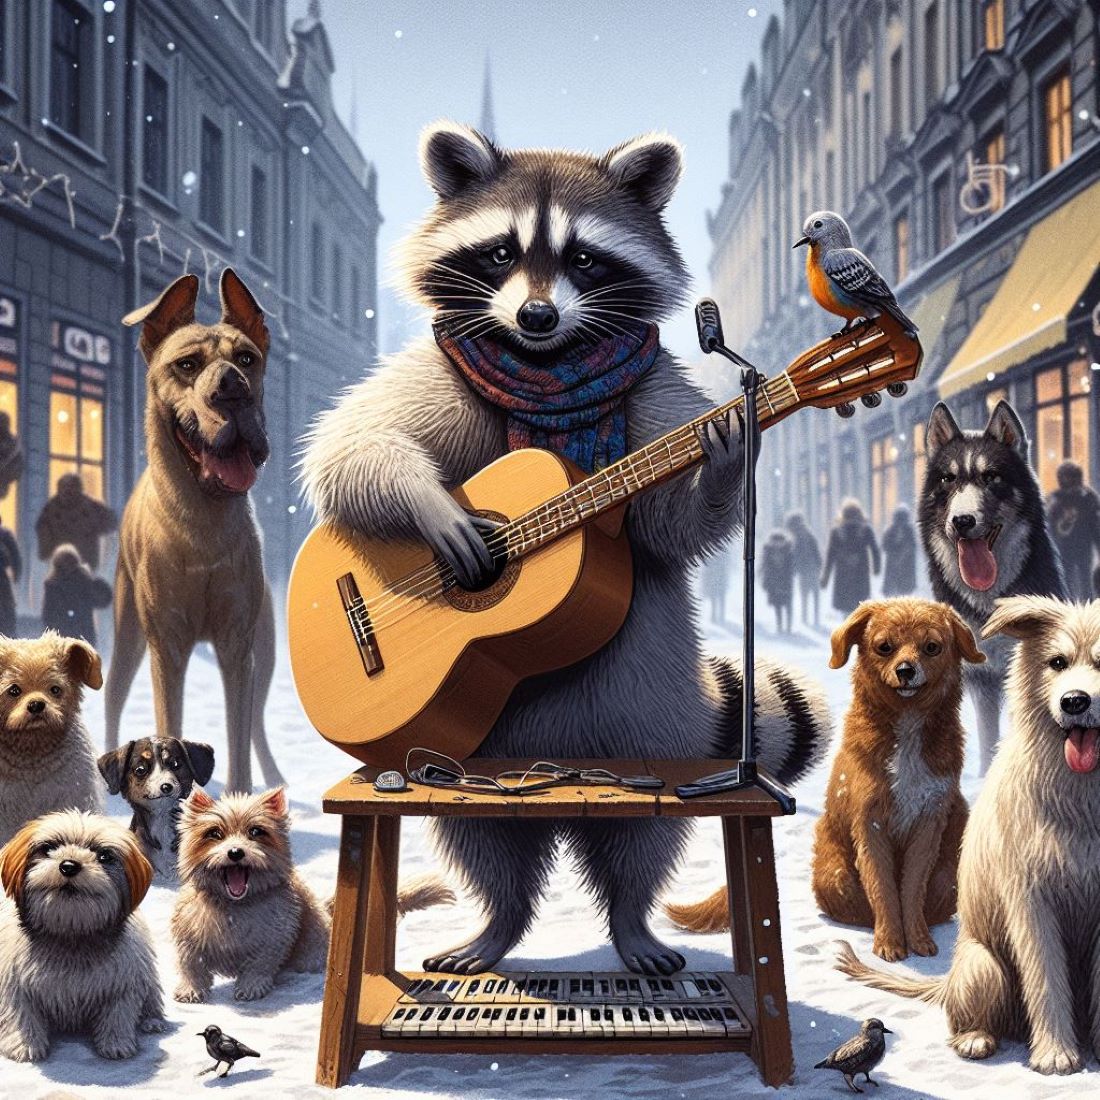 raccoons and dogs preview image.